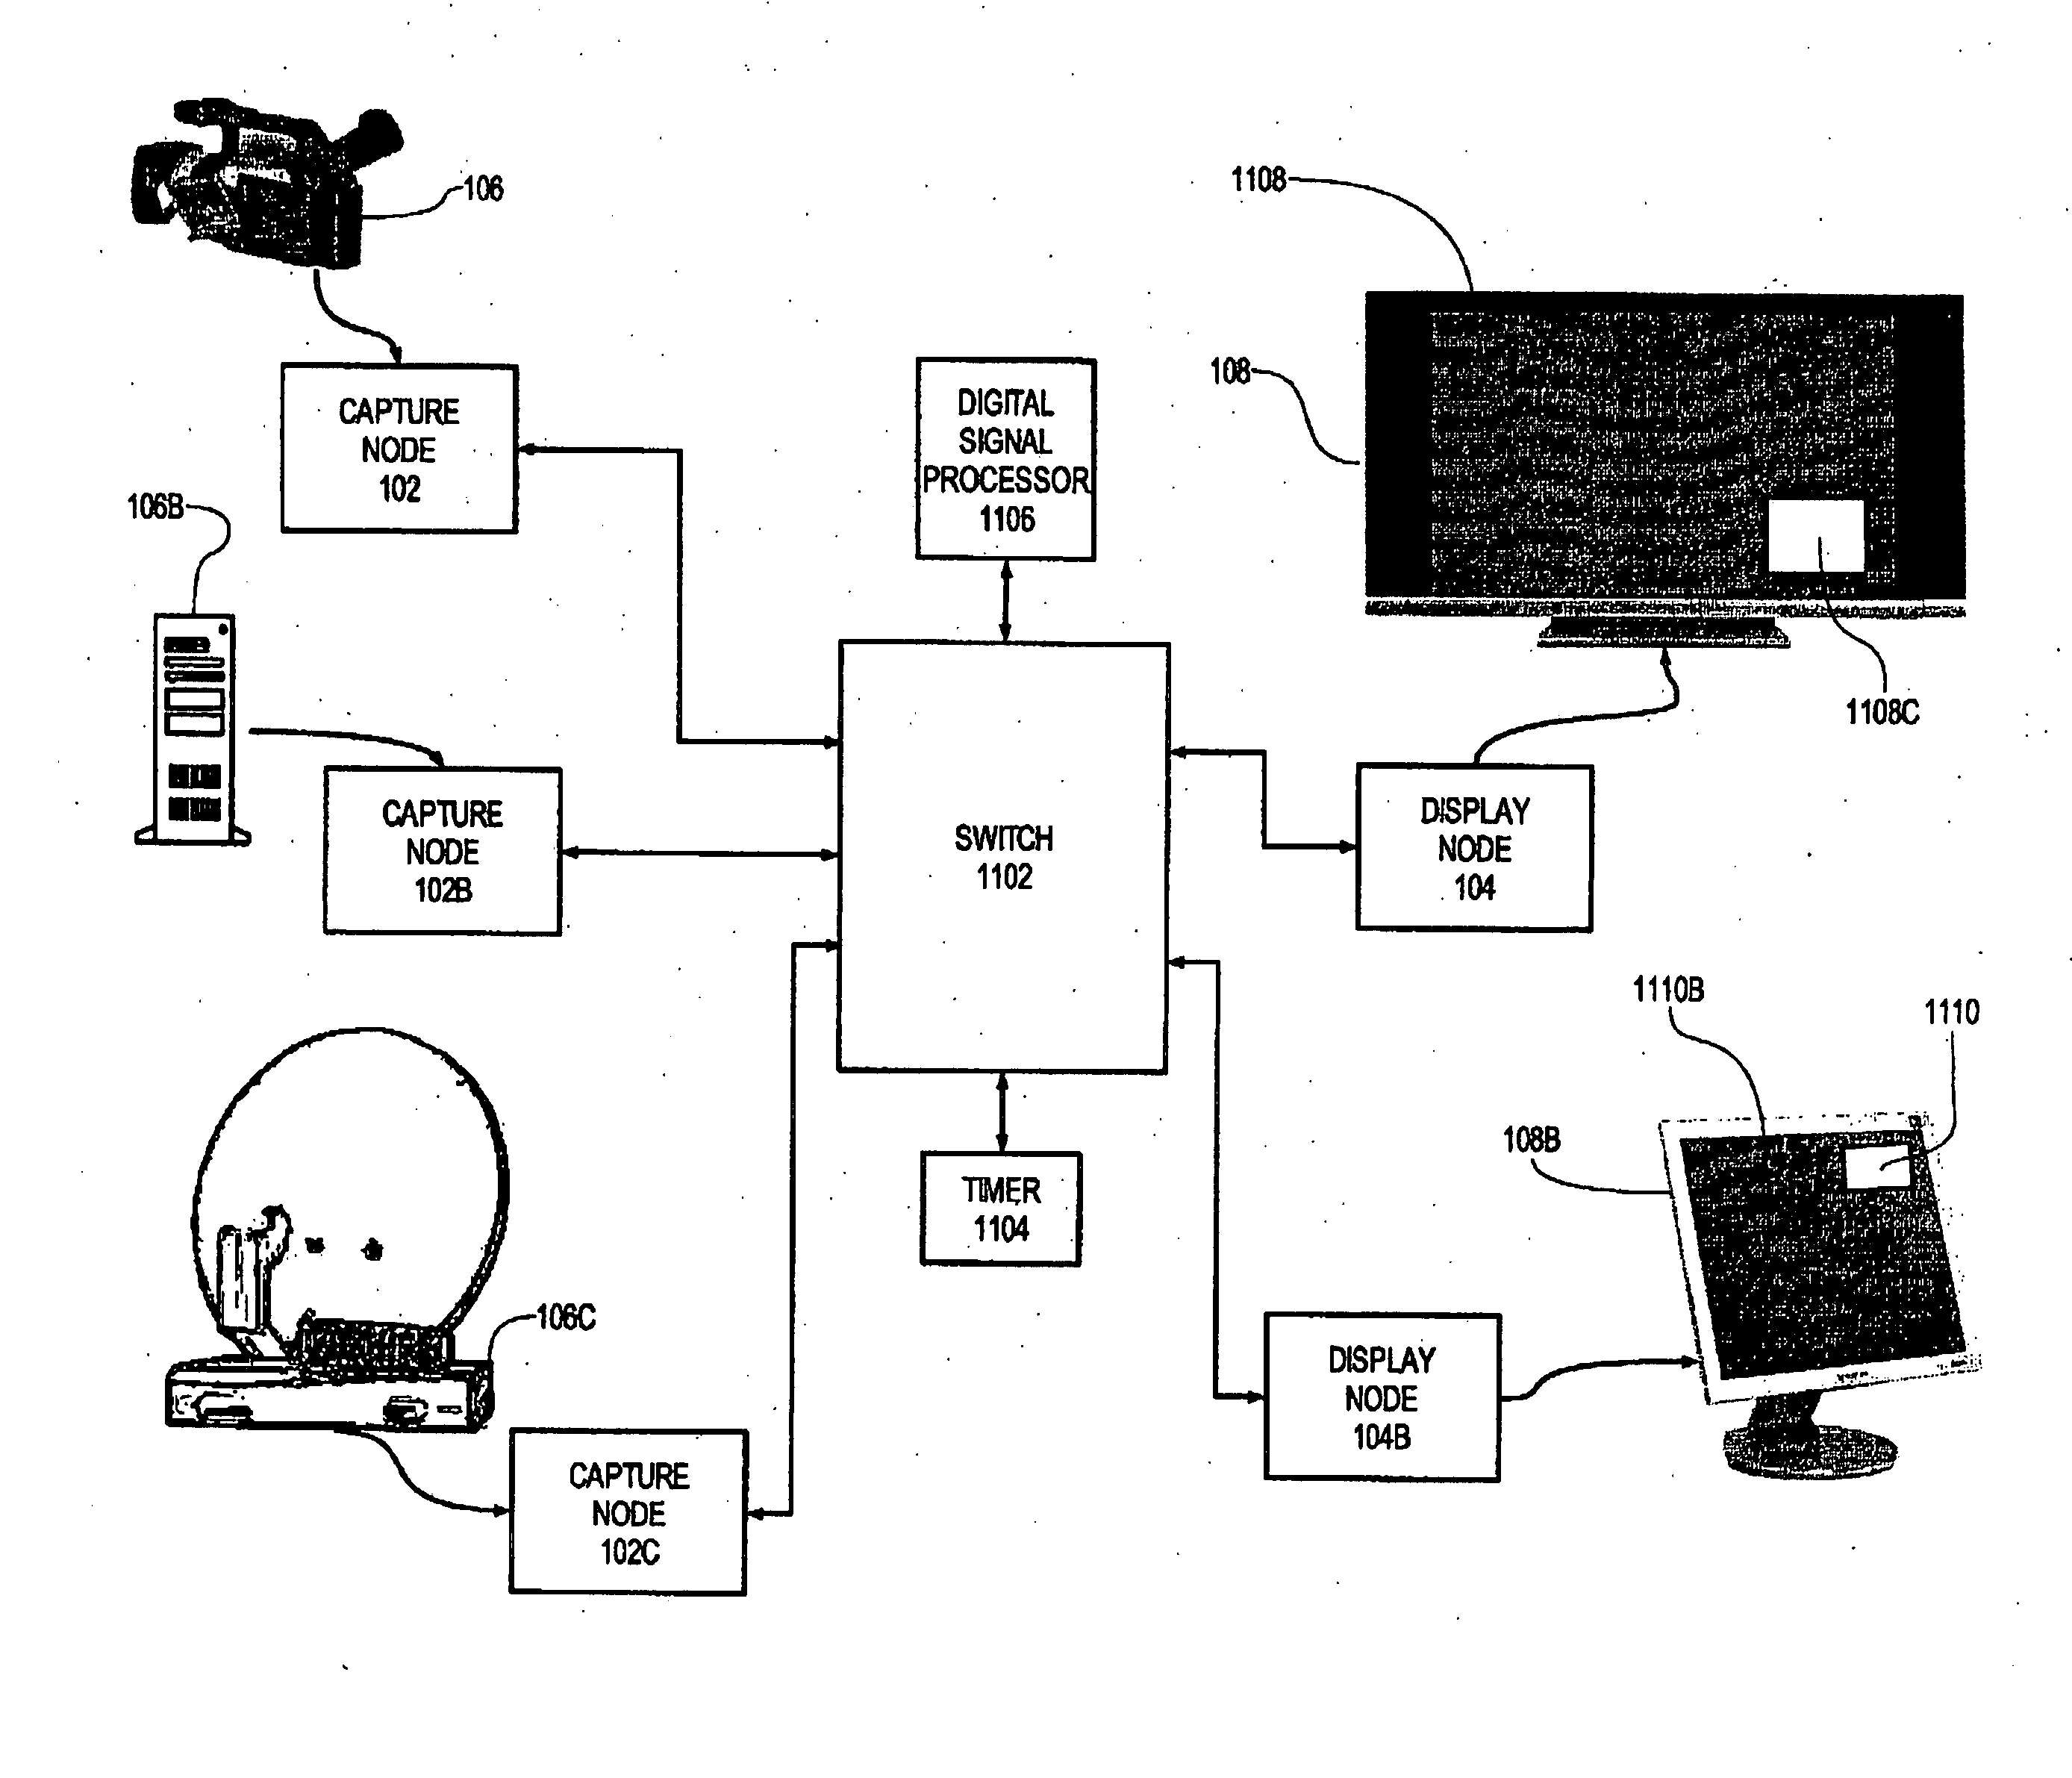 Audiovisual signal routing and distribution system